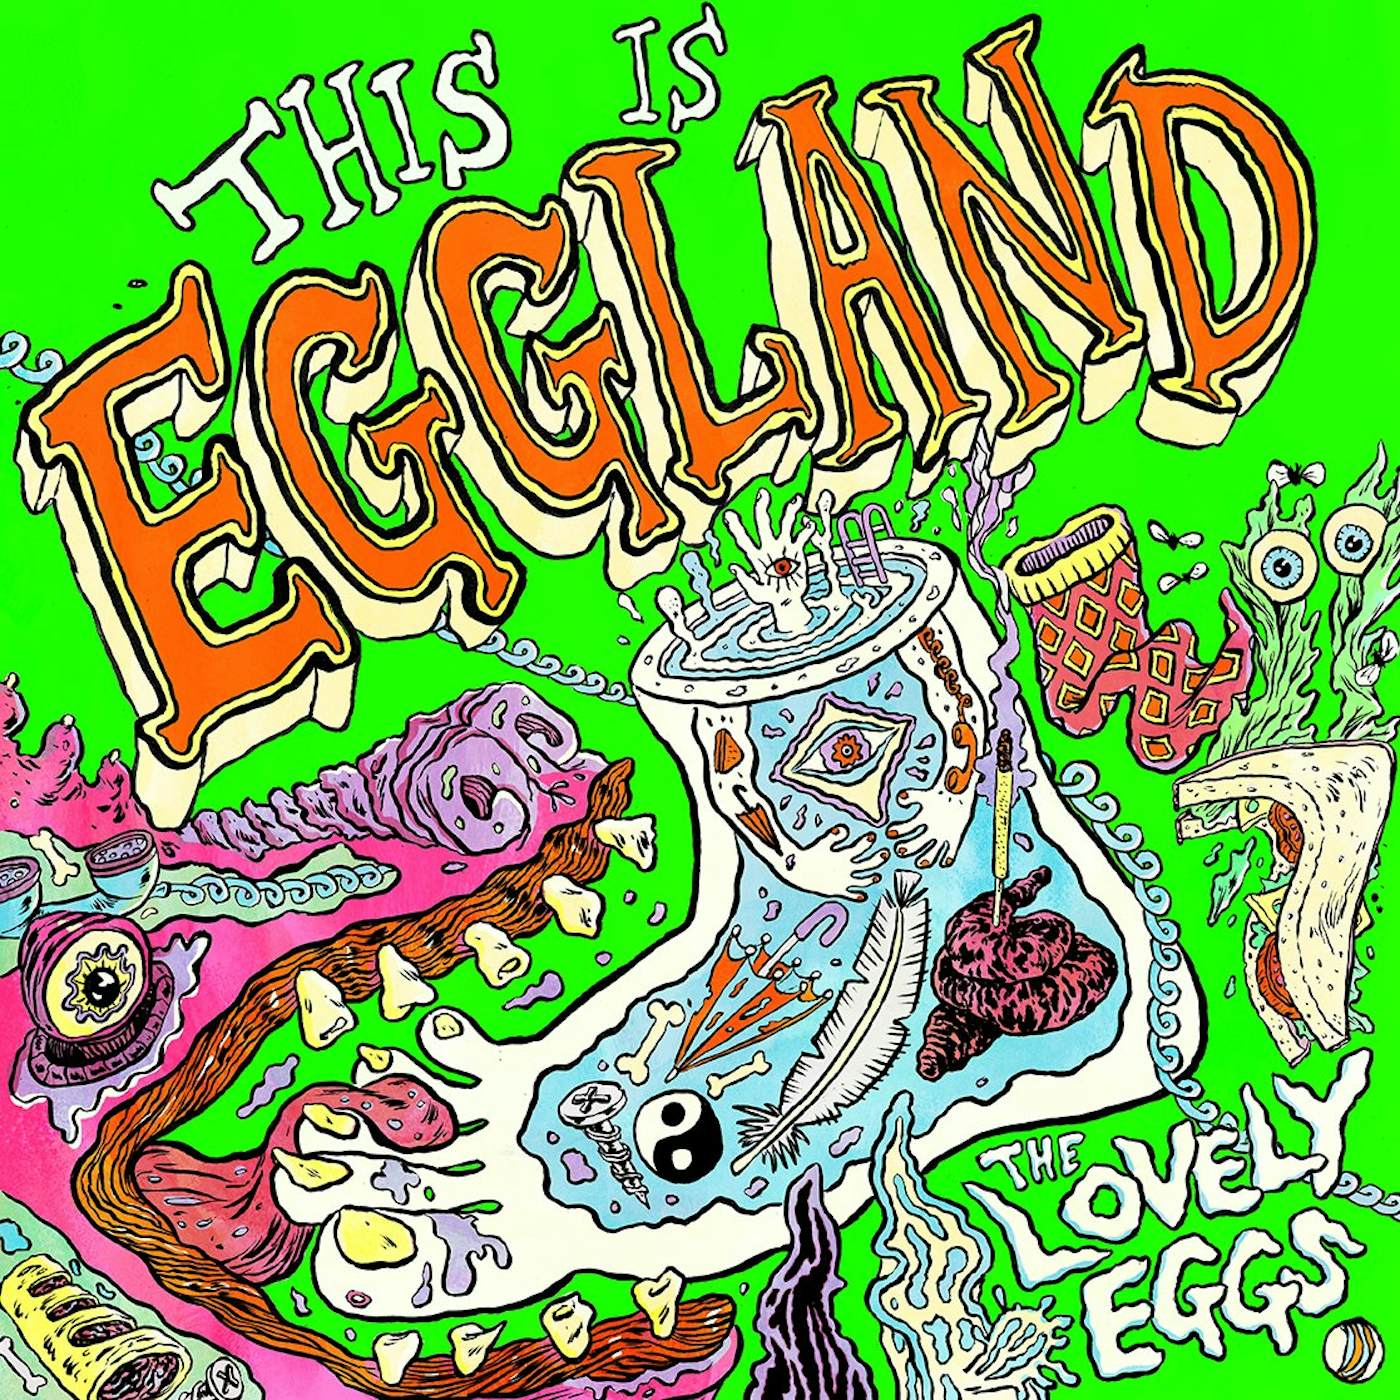 The Lovely Eggs 'This Is Eggland' Vinyl Record